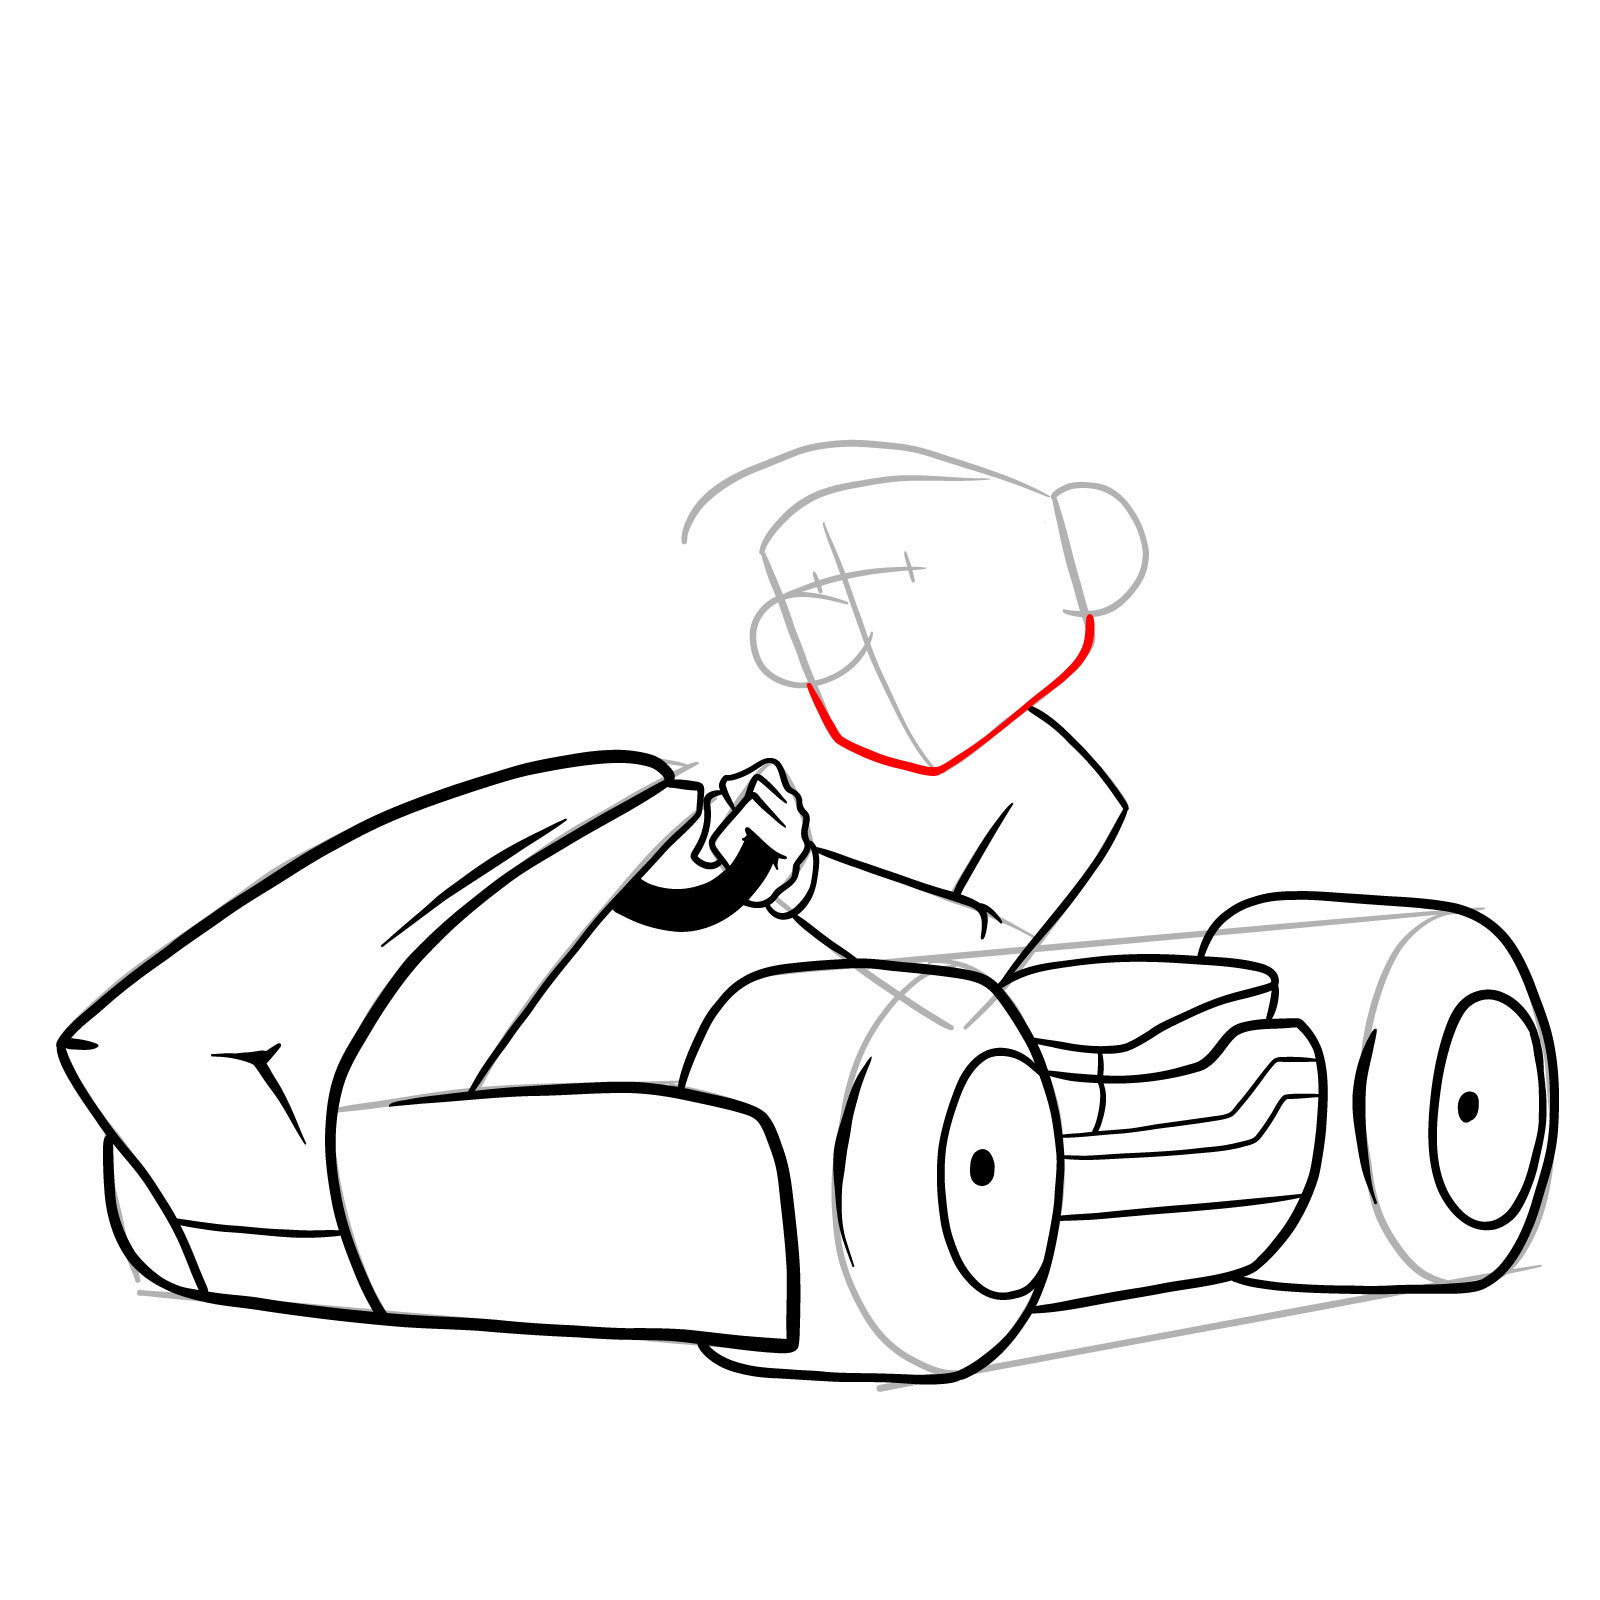 How to draw Race Traitors Mario - step 20